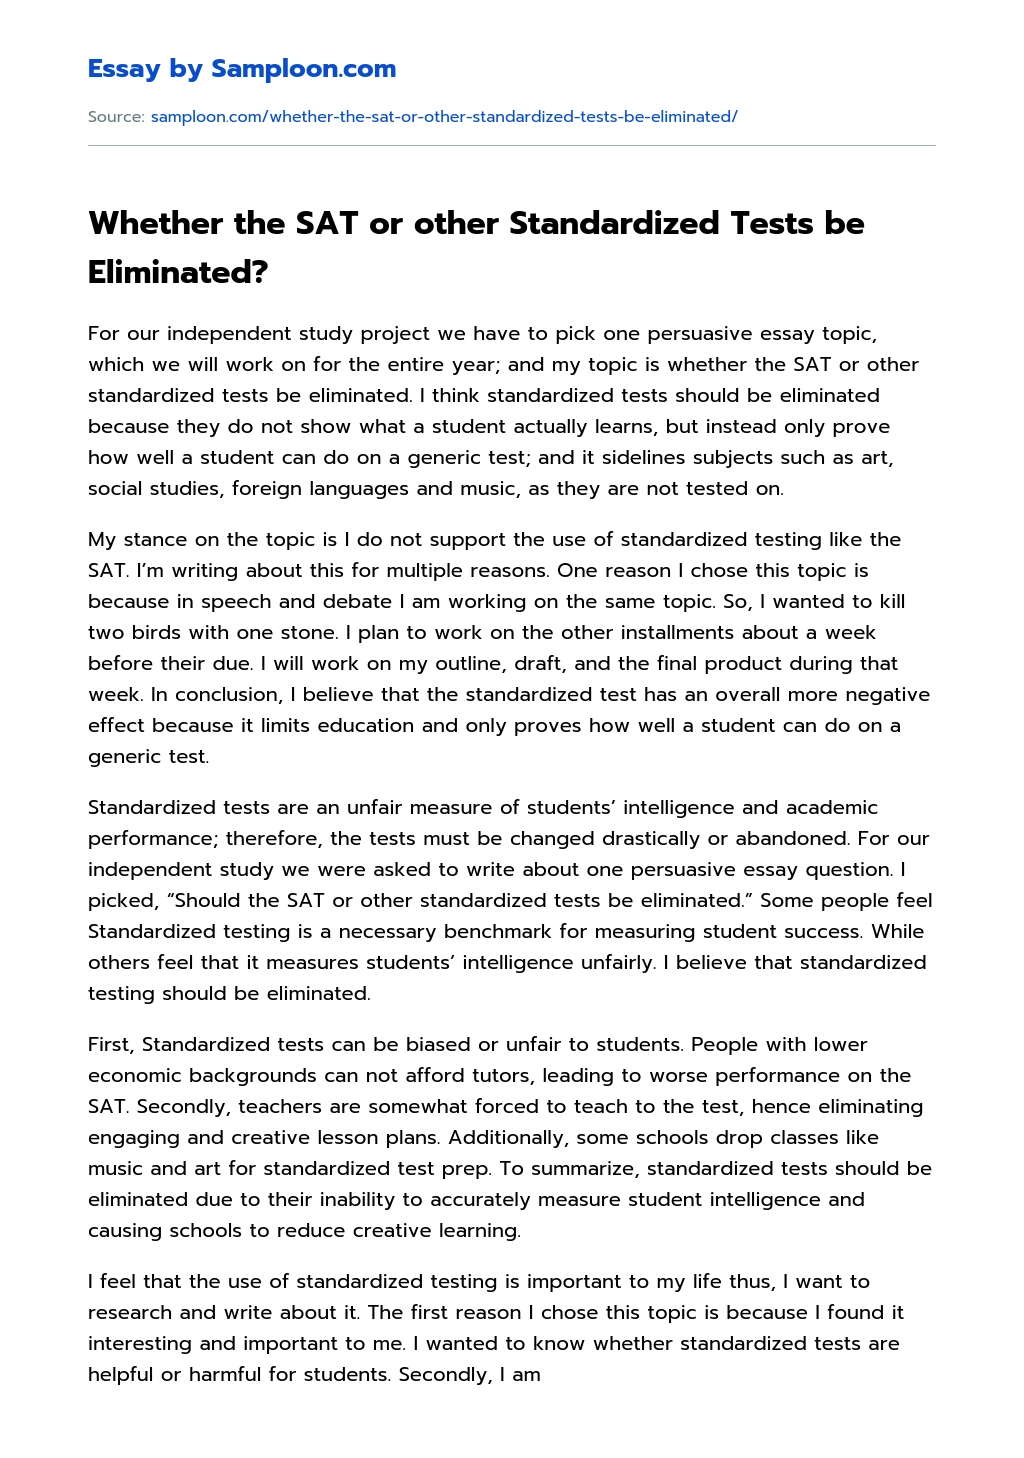 Whether the SAT or other Standardized Tests be Eliminated? essay